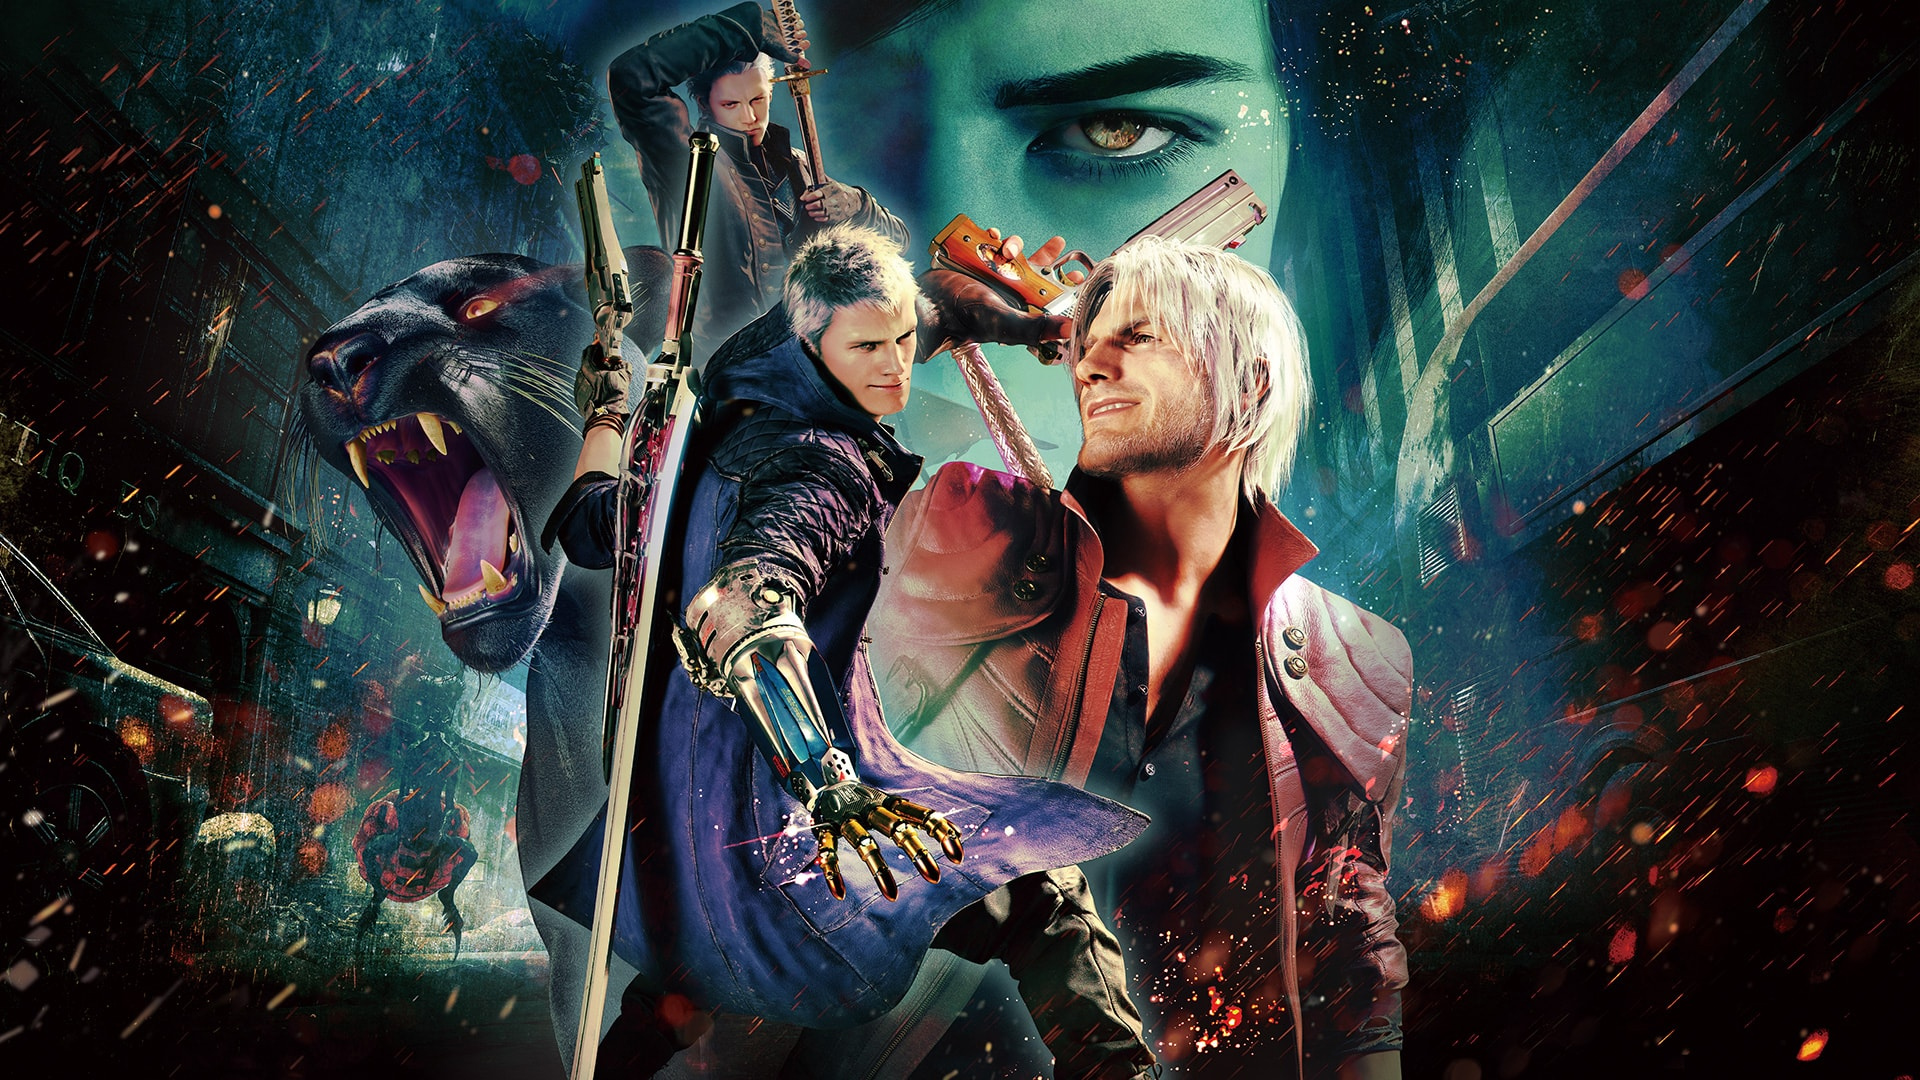 Vergil's Devil May Cry 5 Special Edition Theme Is Out Now on Spotify and  Other Music Platforms